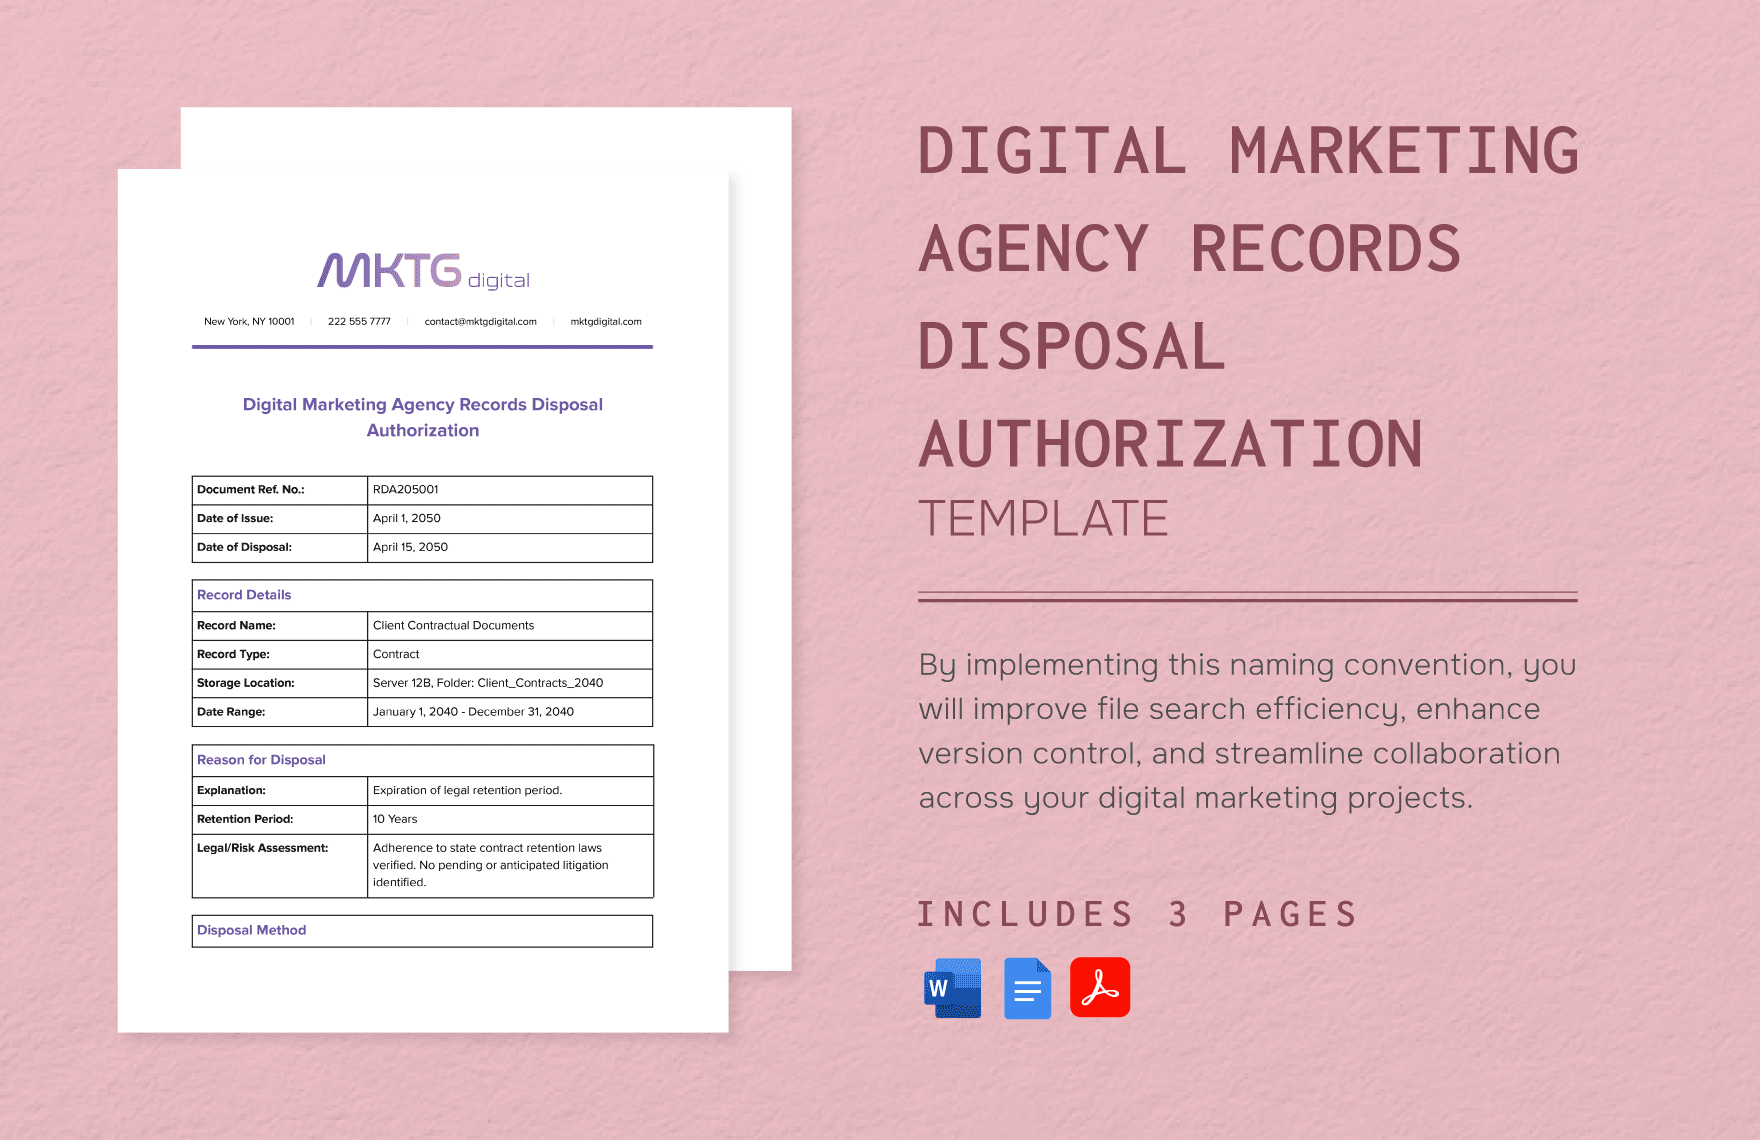 Digital Marketing Agency Records Disposal Authorization Template